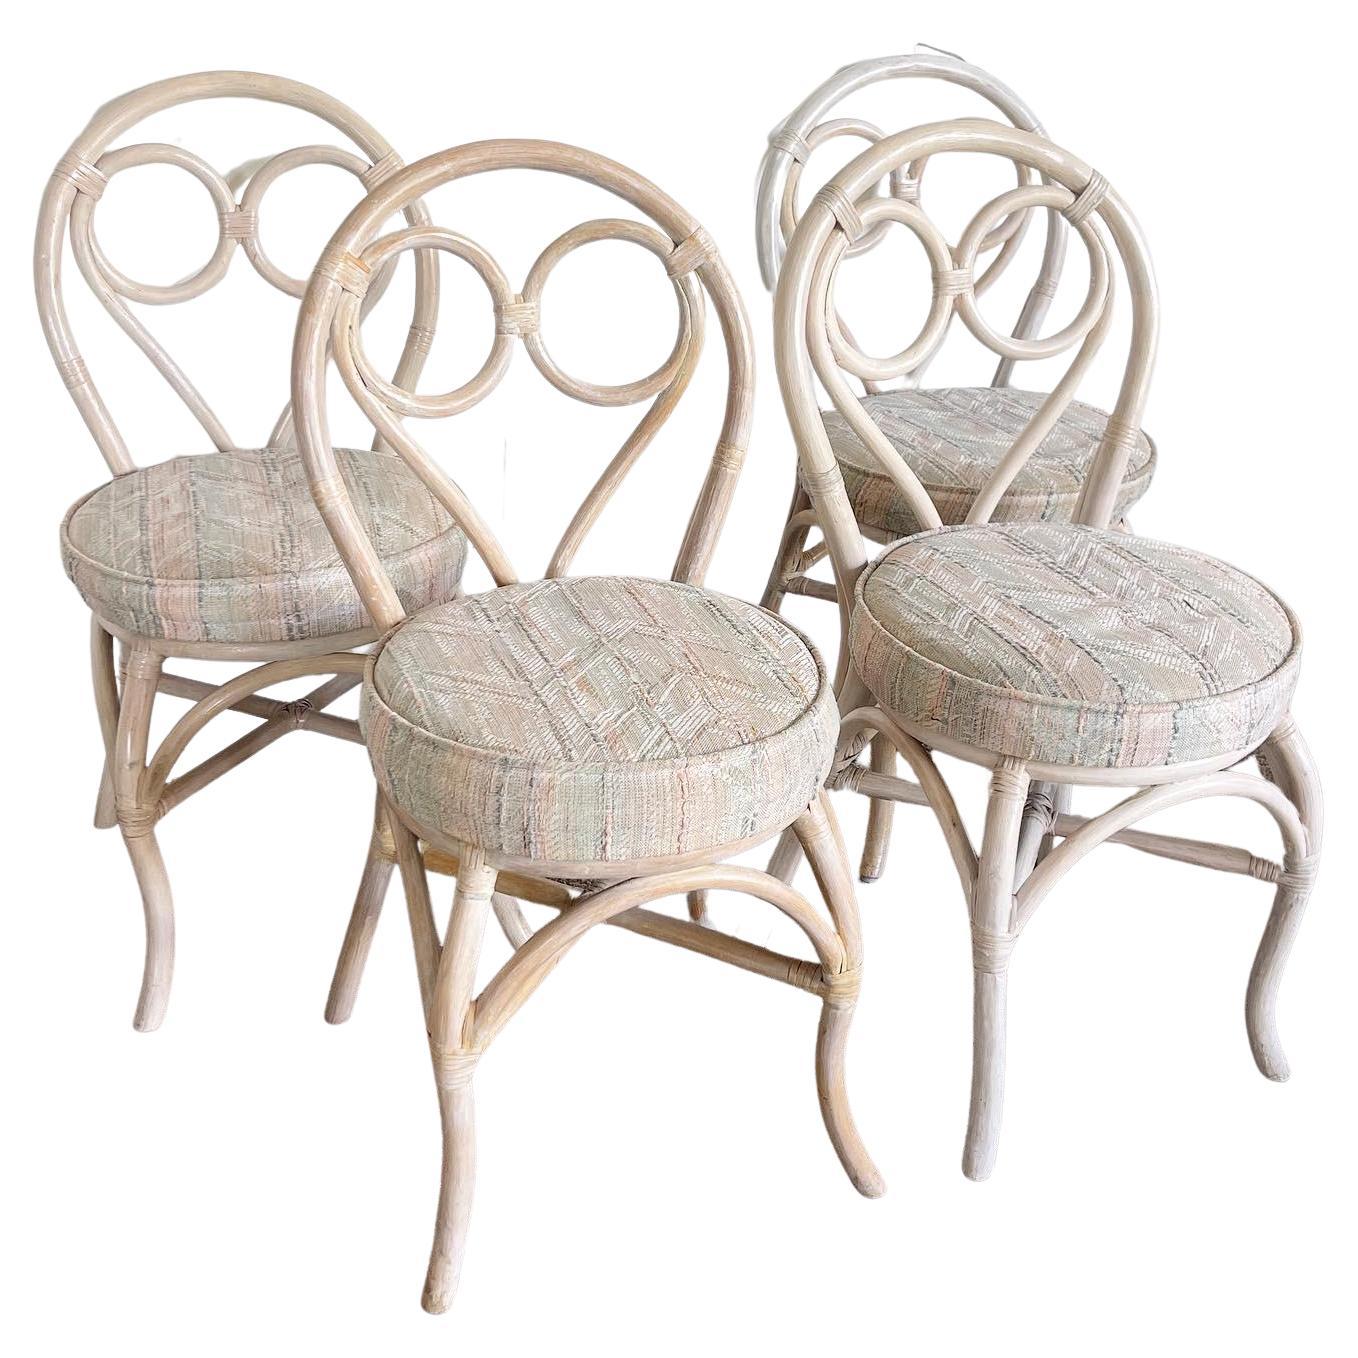 Boho Chic White Washed Bamboo Rattan Dining Chairs - Set of 4 For Sale